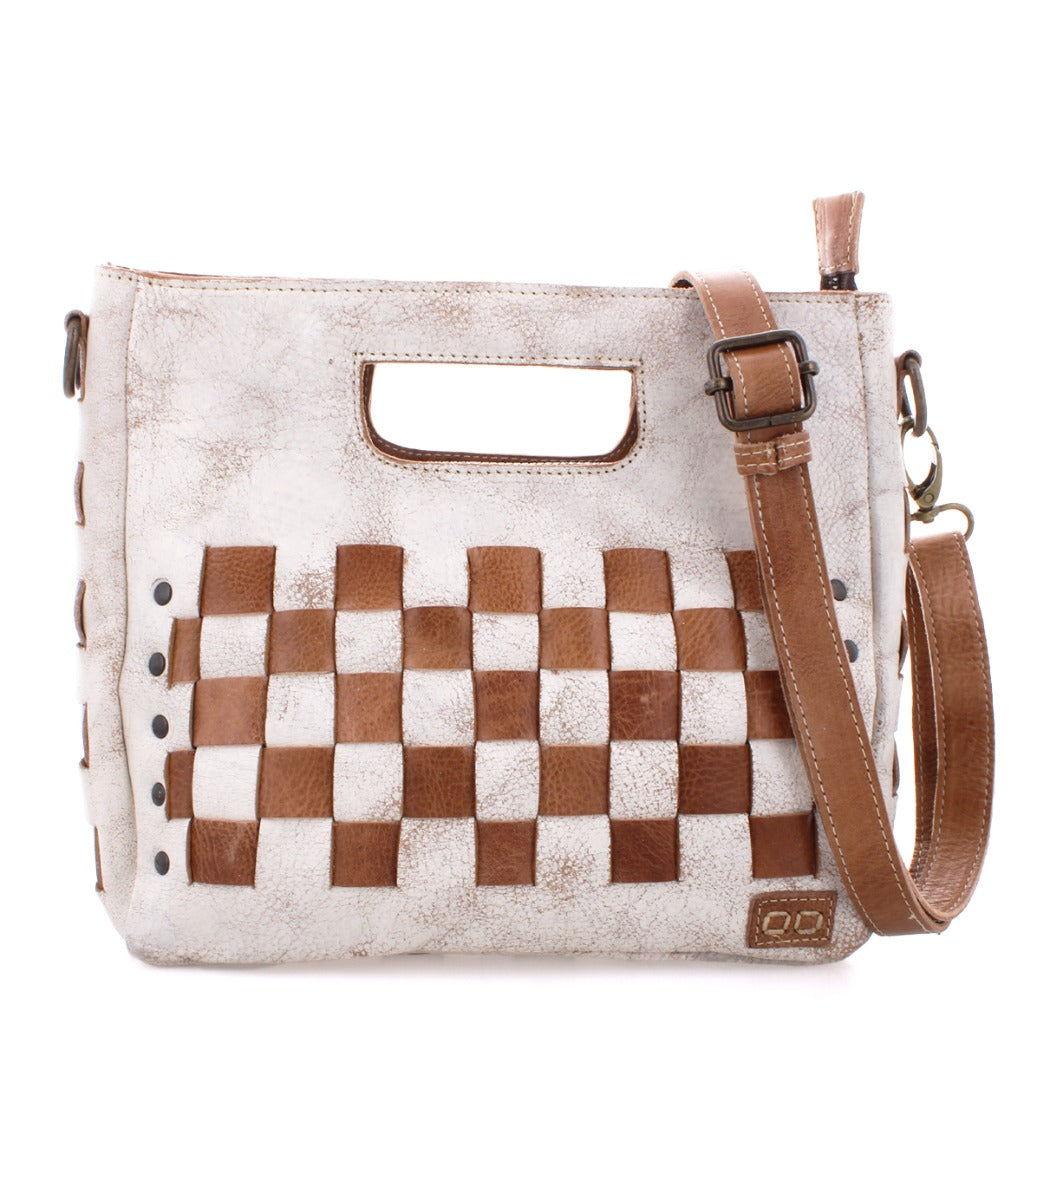 A white and tan Bed Stu Keiki bag with a checkered pattern.